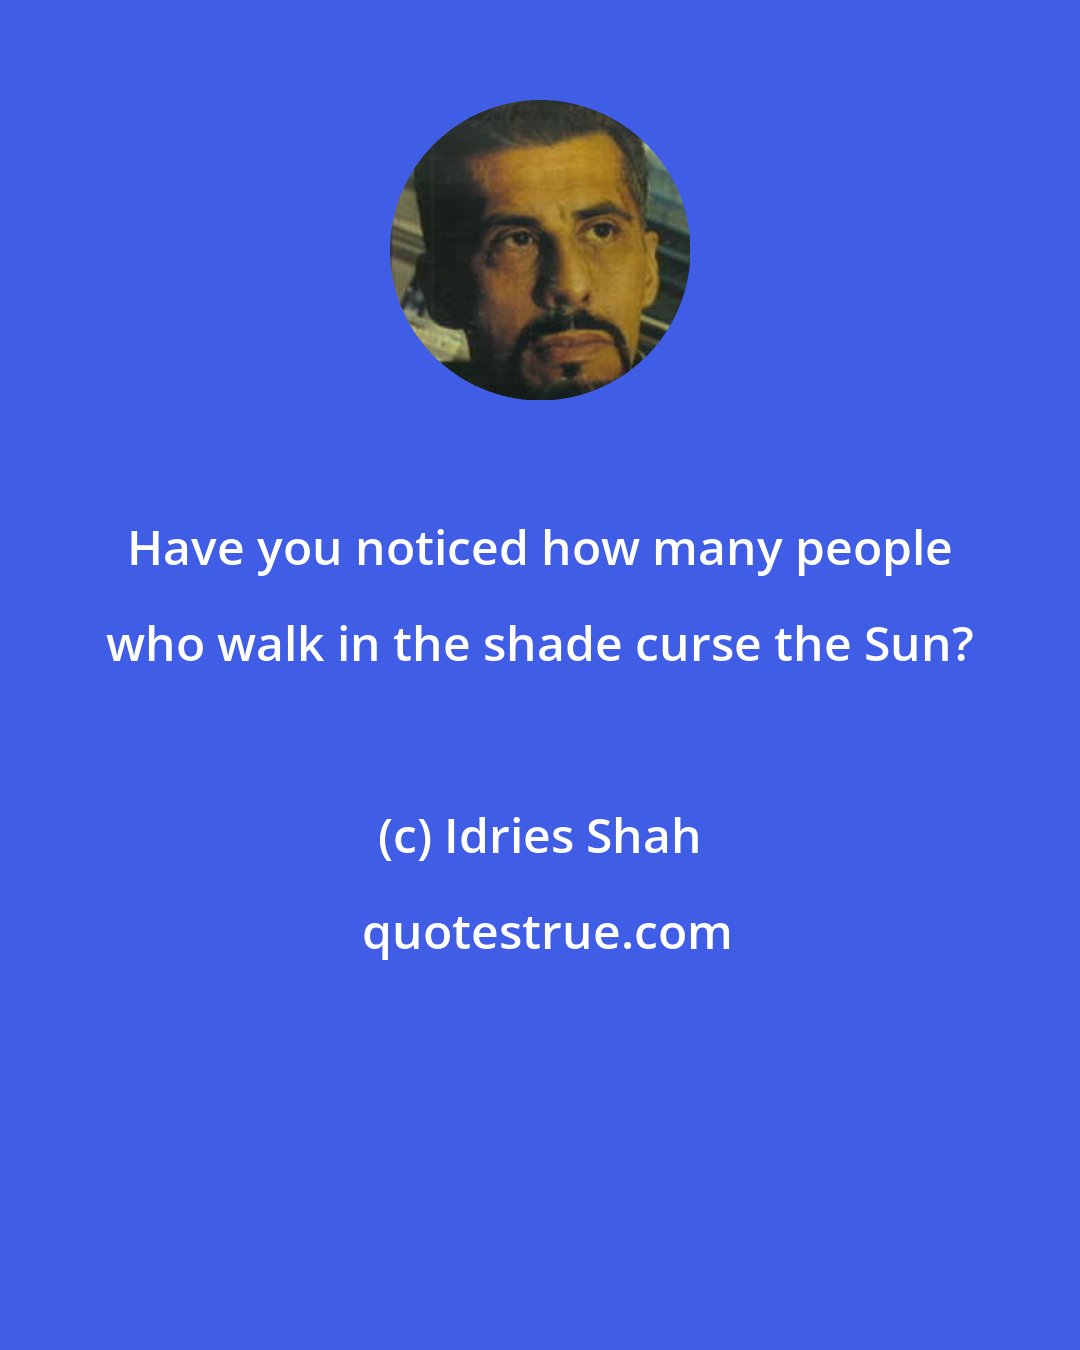 Idries Shah: Have you noticed how many people who walk in the shade curse the Sun?